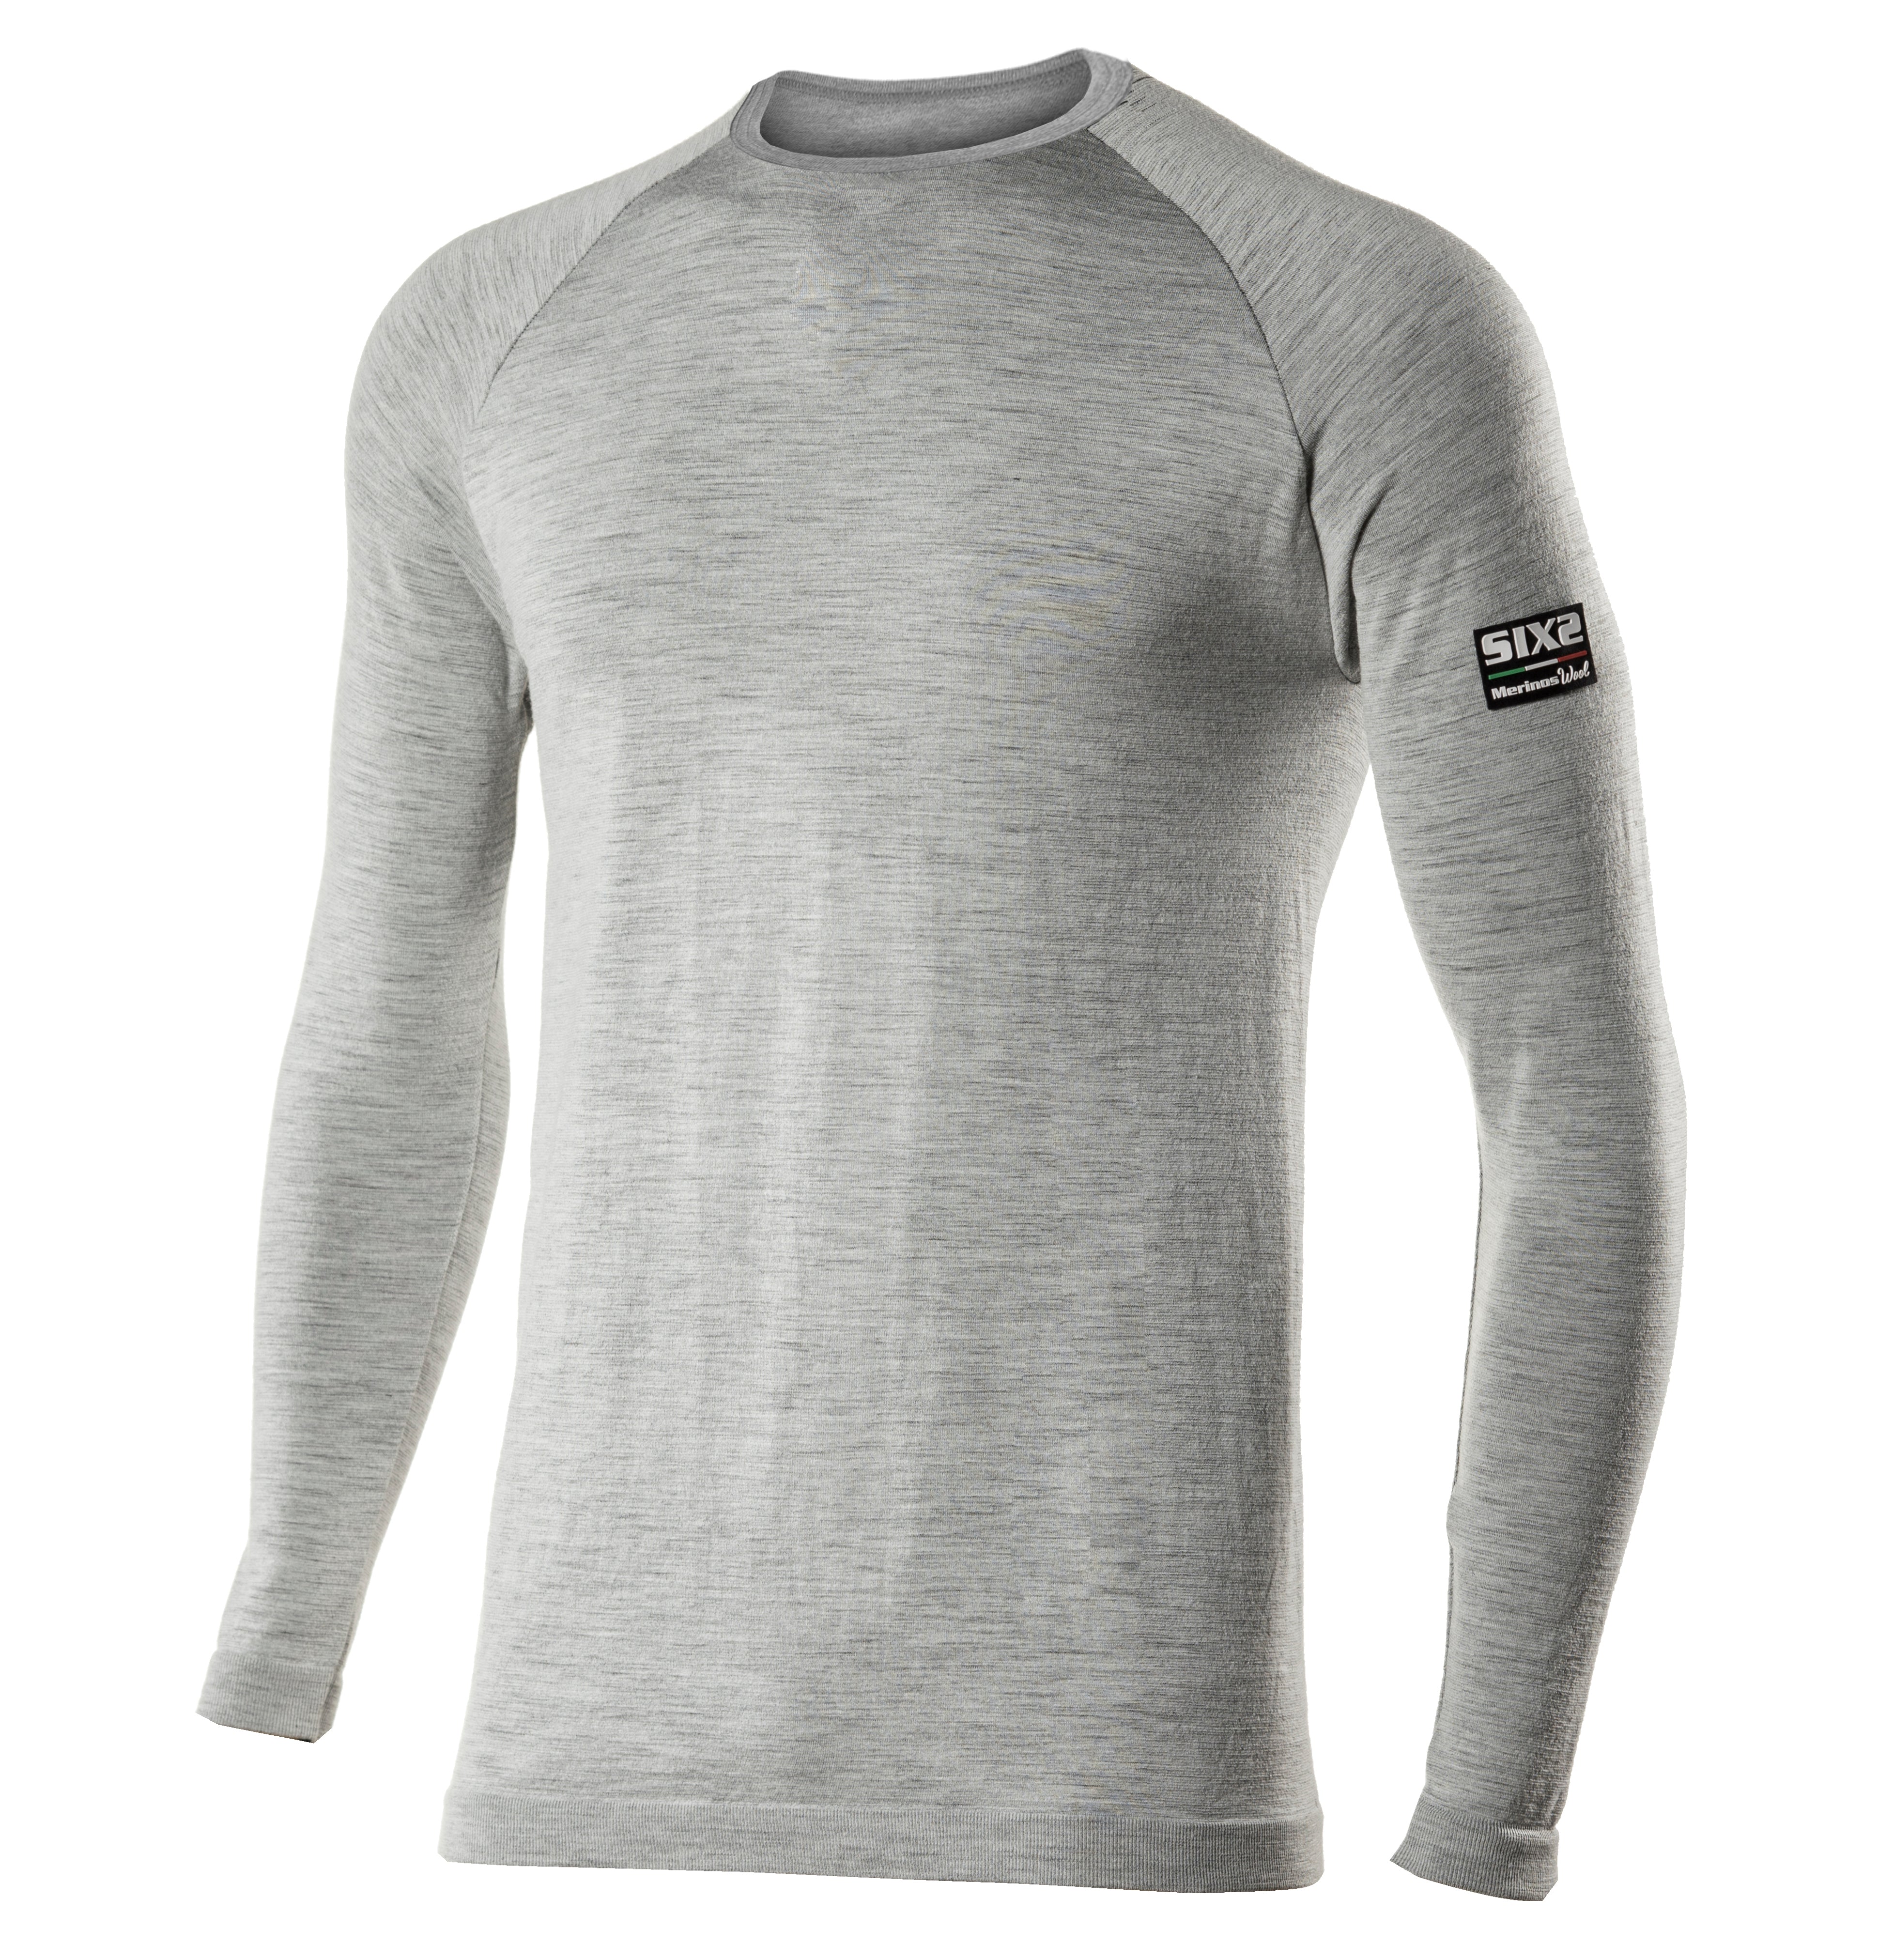 Sixs - TS2 Long Sleeve Round Neck Jersey Carbon Merinos Wool